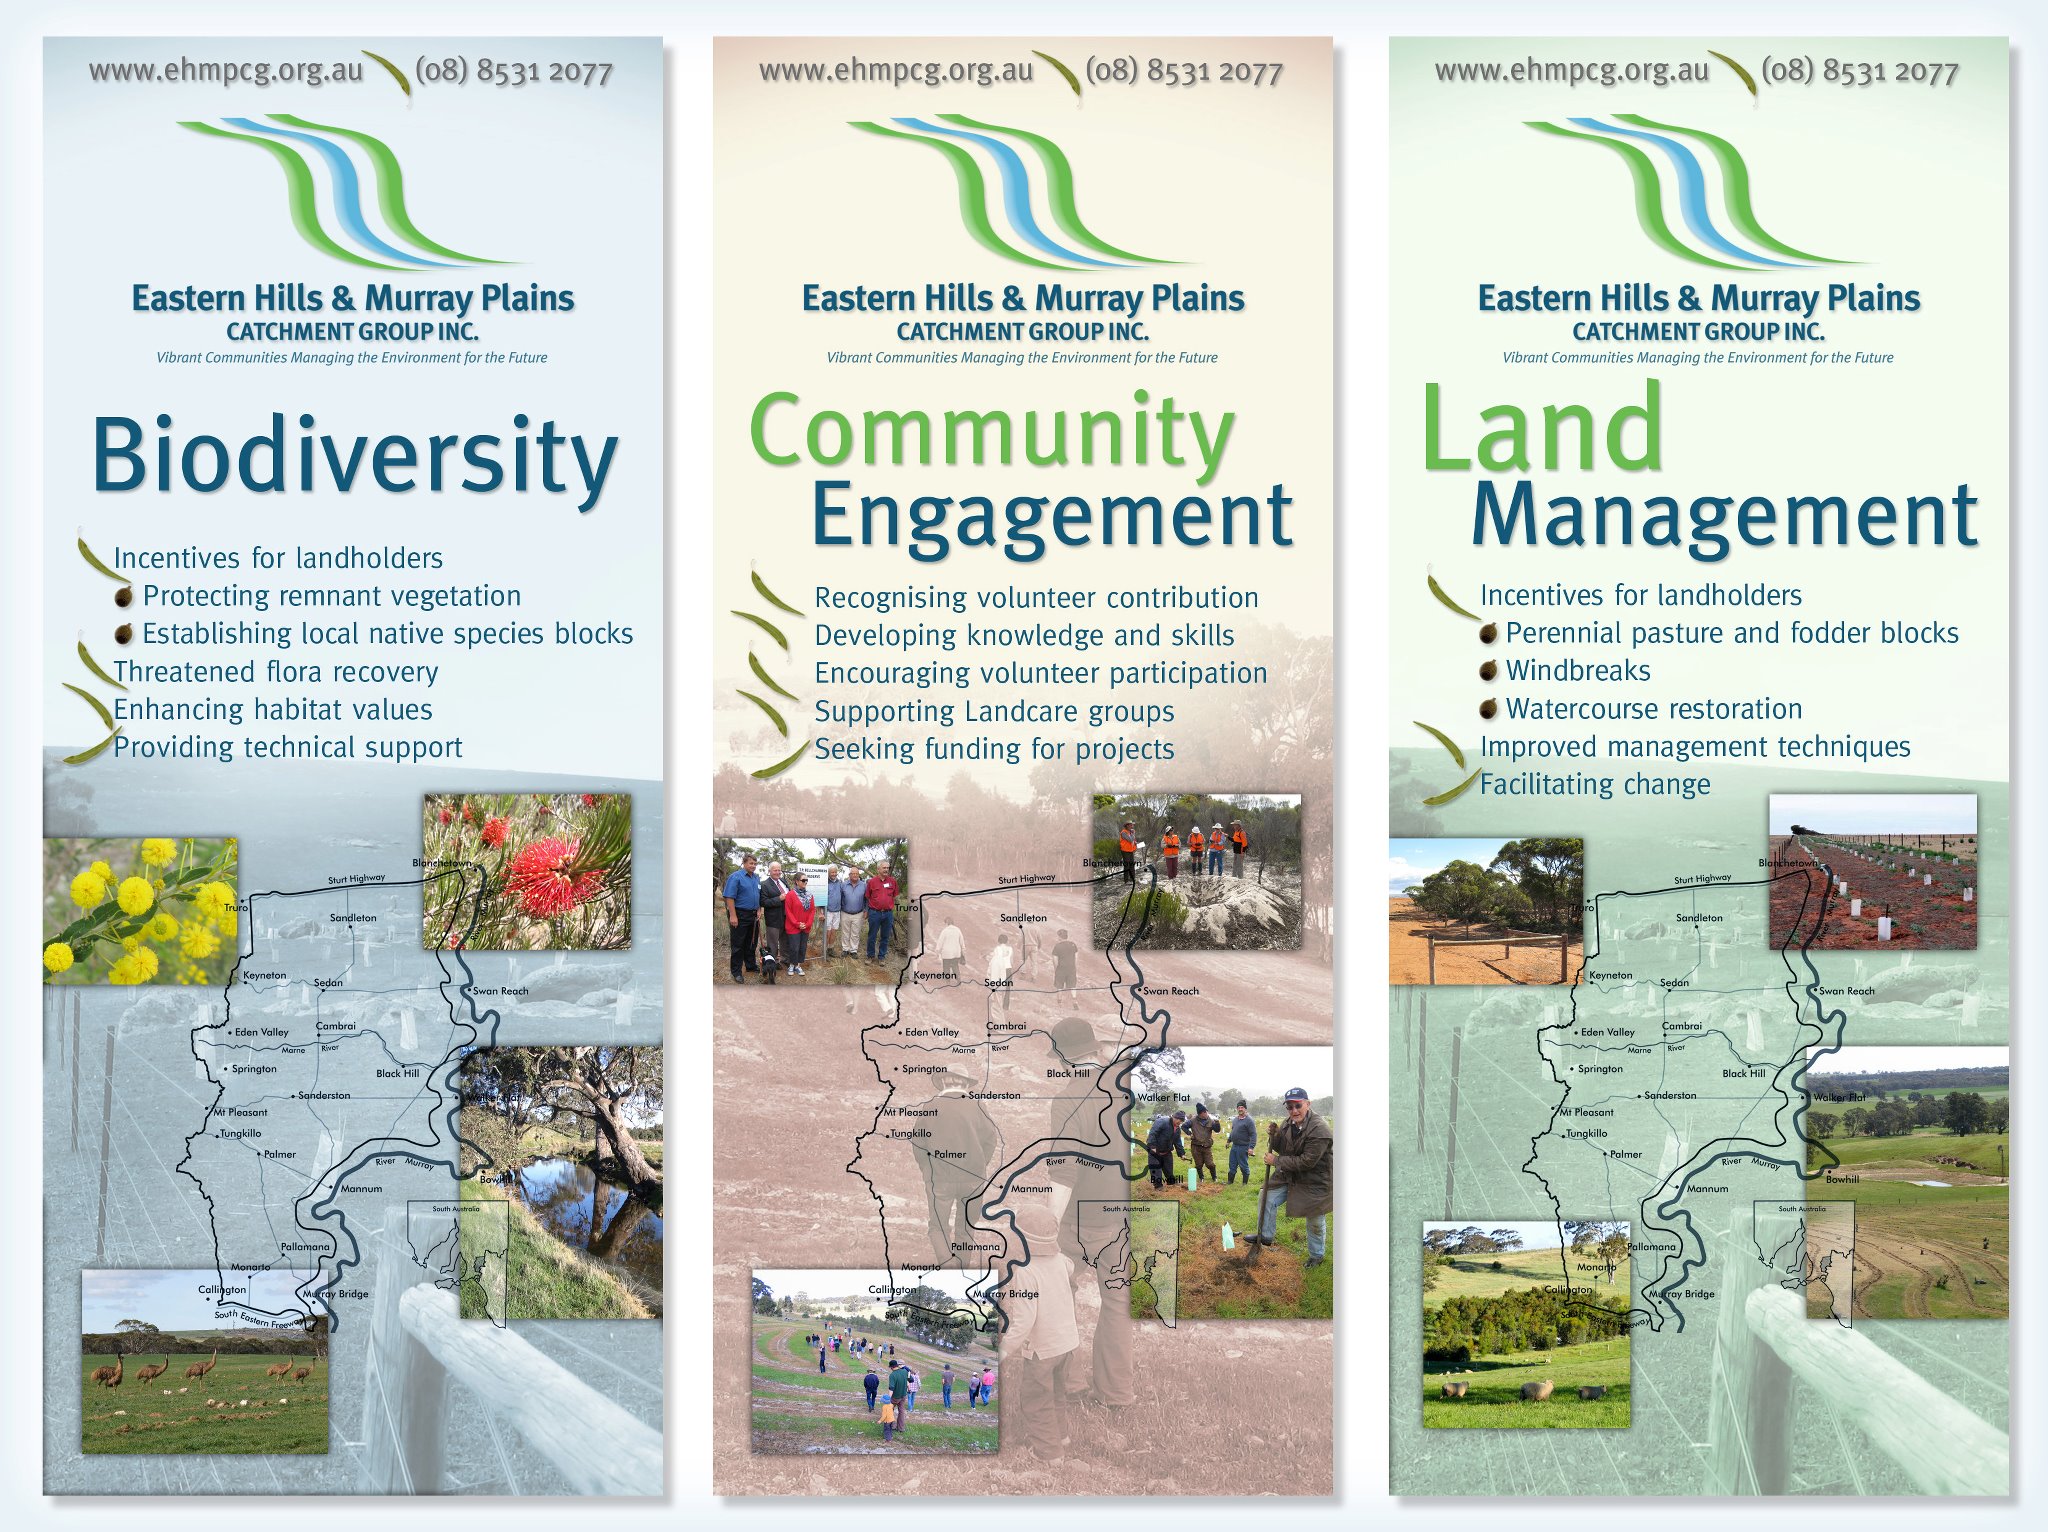 Eastern Hills and Murray Plains Catchment Group banners